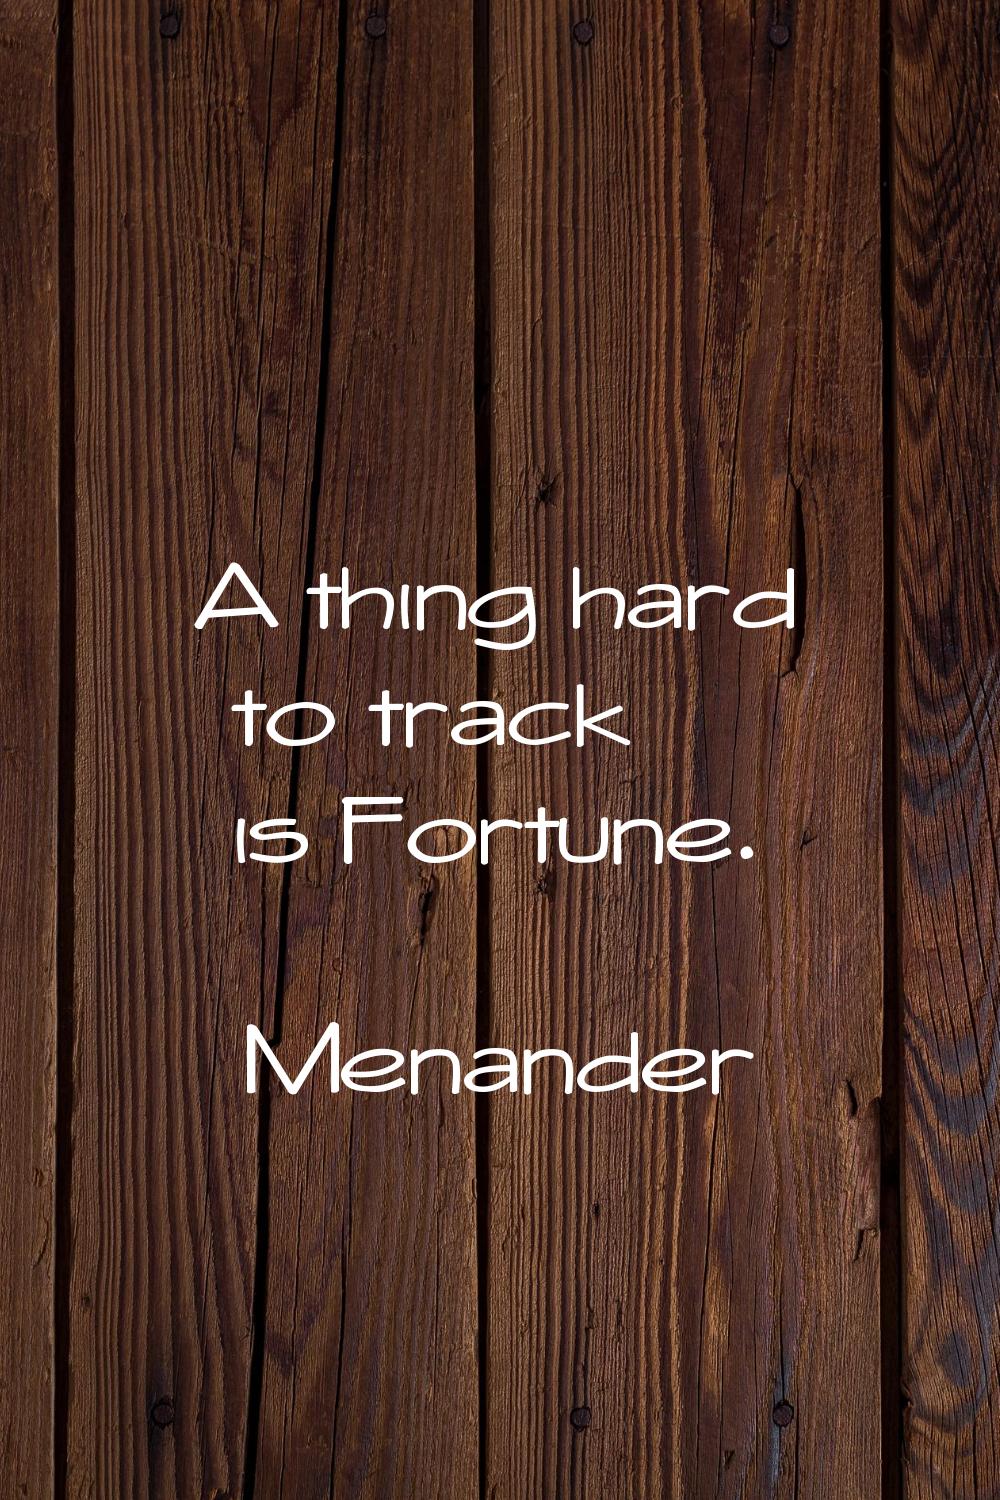 A thing hard to track is Fortune.